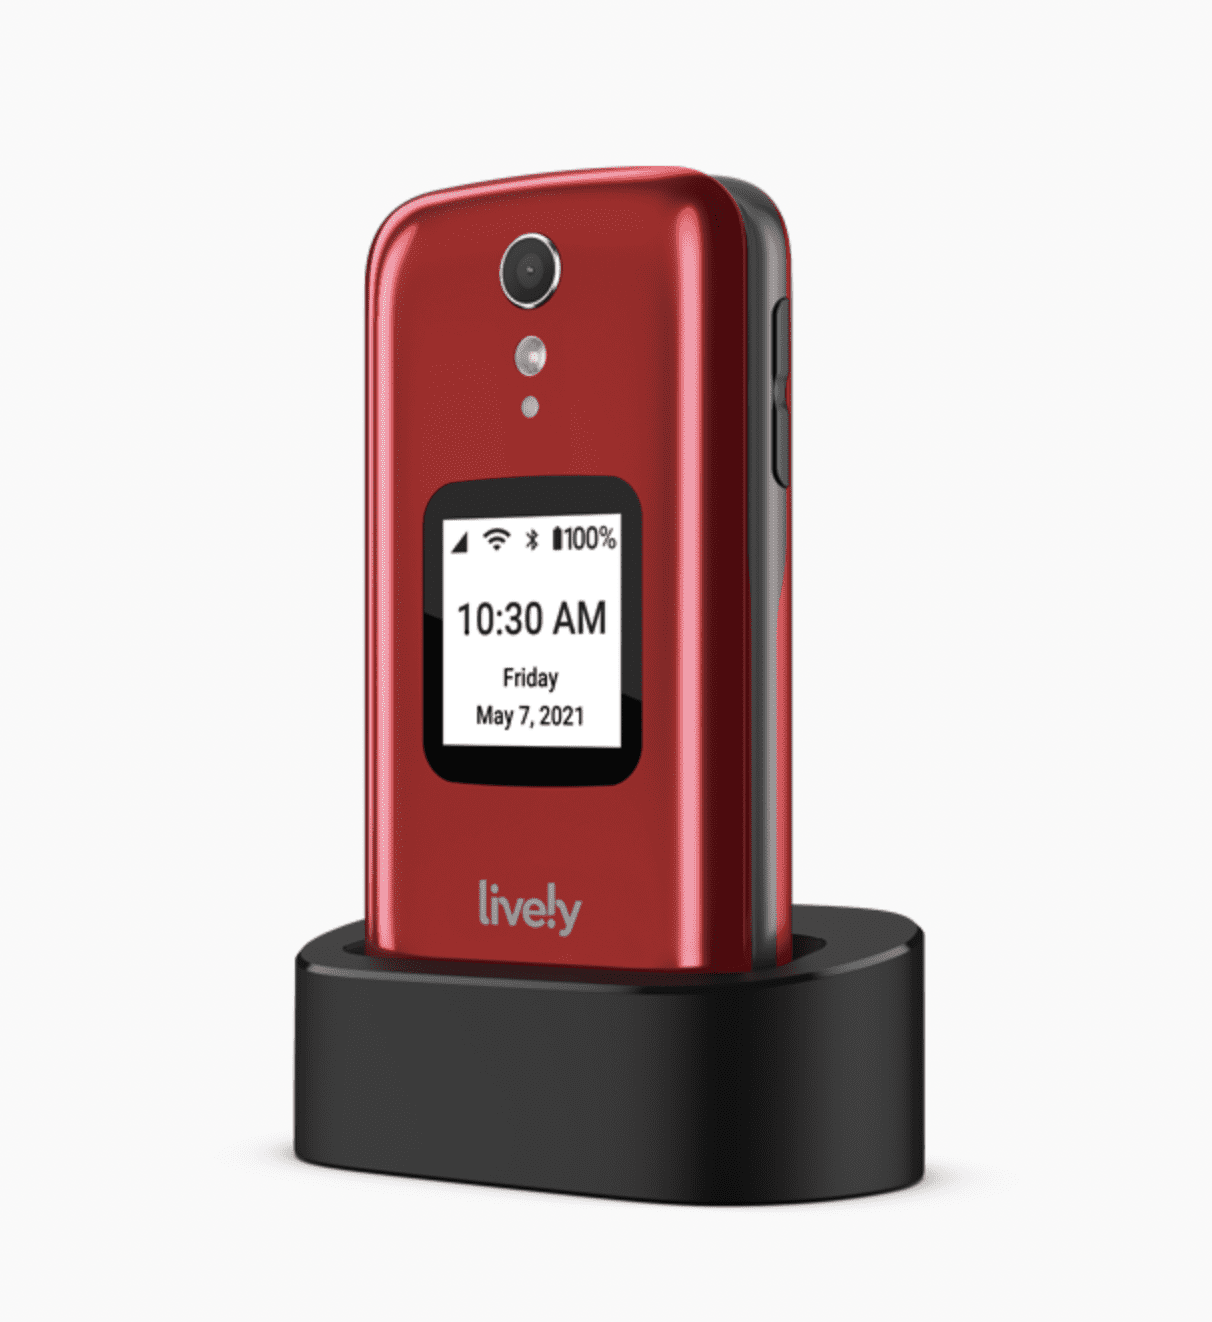 The Flip2 comes with its own charging dock.